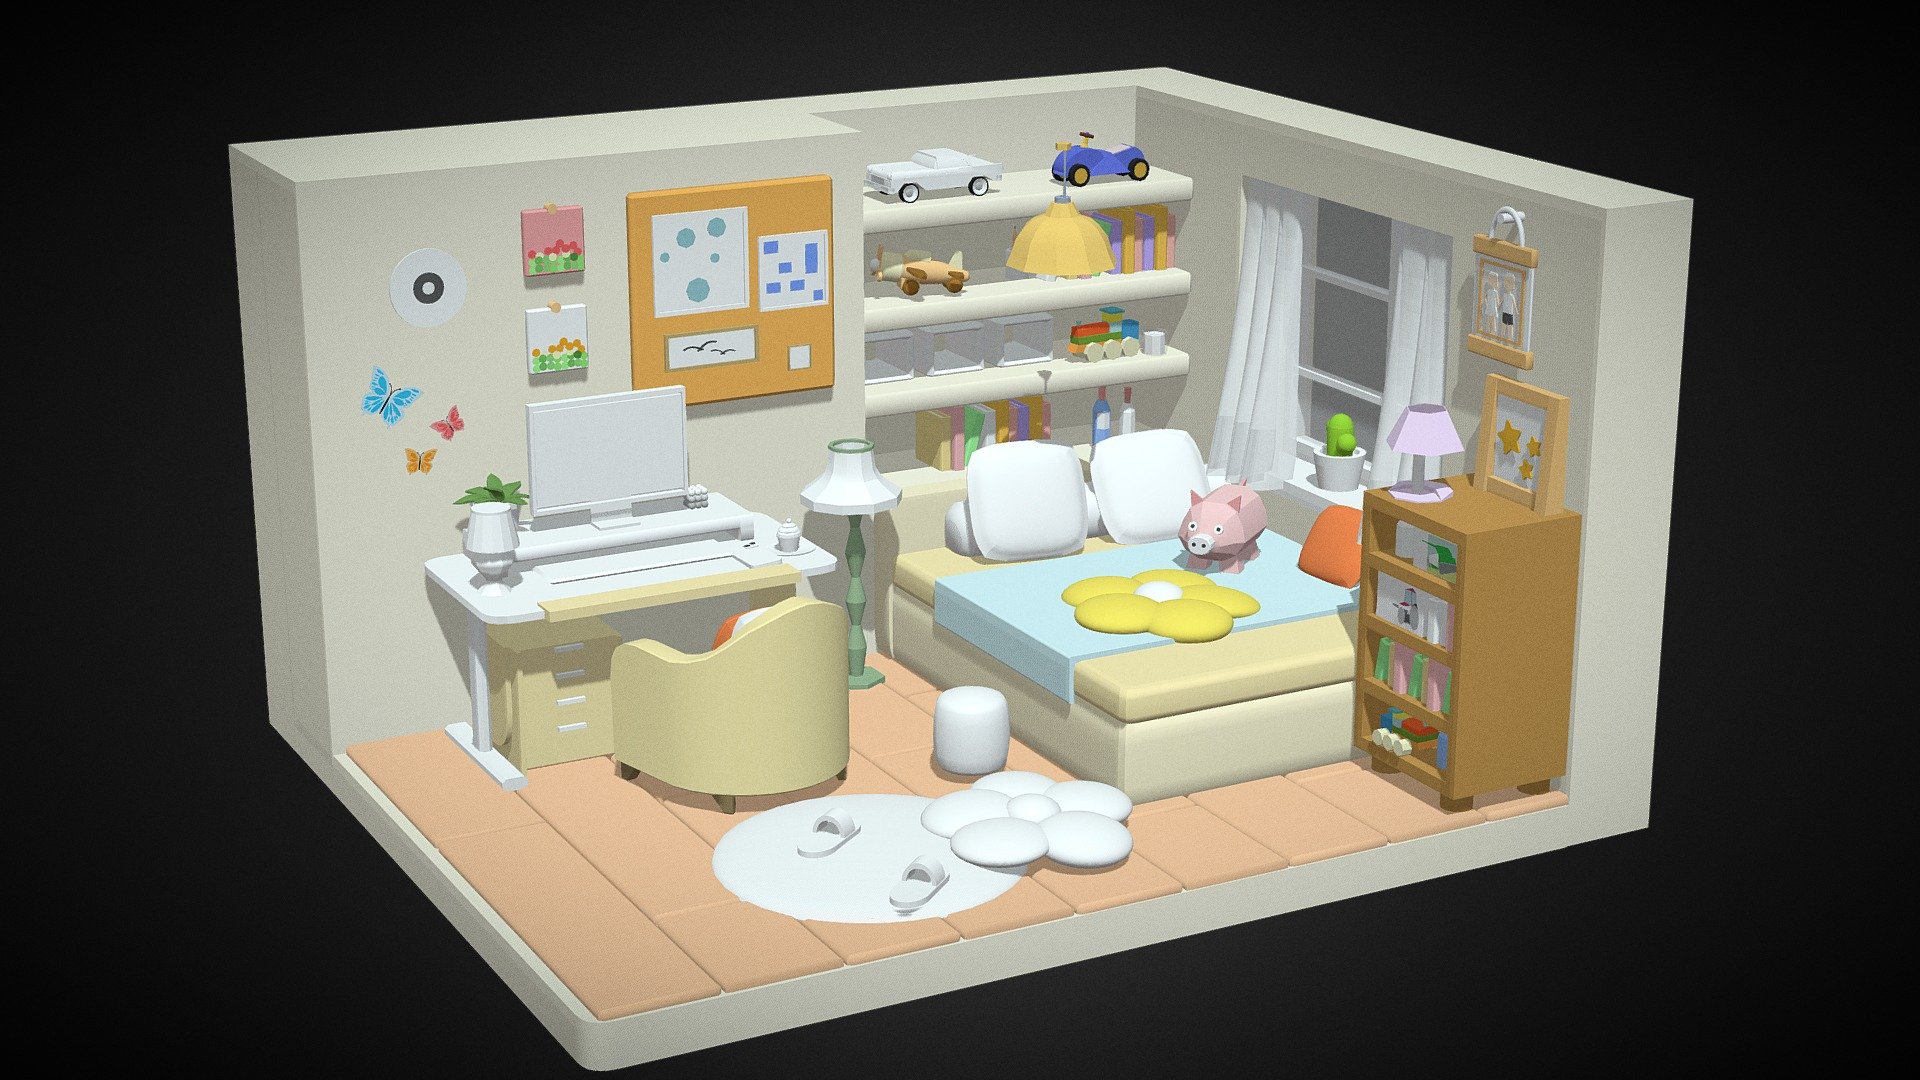 🥰A web-based online 3D modeling platform that creates all the materials here.

😻Love to create both elemental and inspirational models for 3d games！

😏Want more? Please visit 3d.xyz👈💗where you can not only export but also model for free! - Cartoon Bedroom - Download Free 3D model by 3d.xyz (@webuild) 3d model